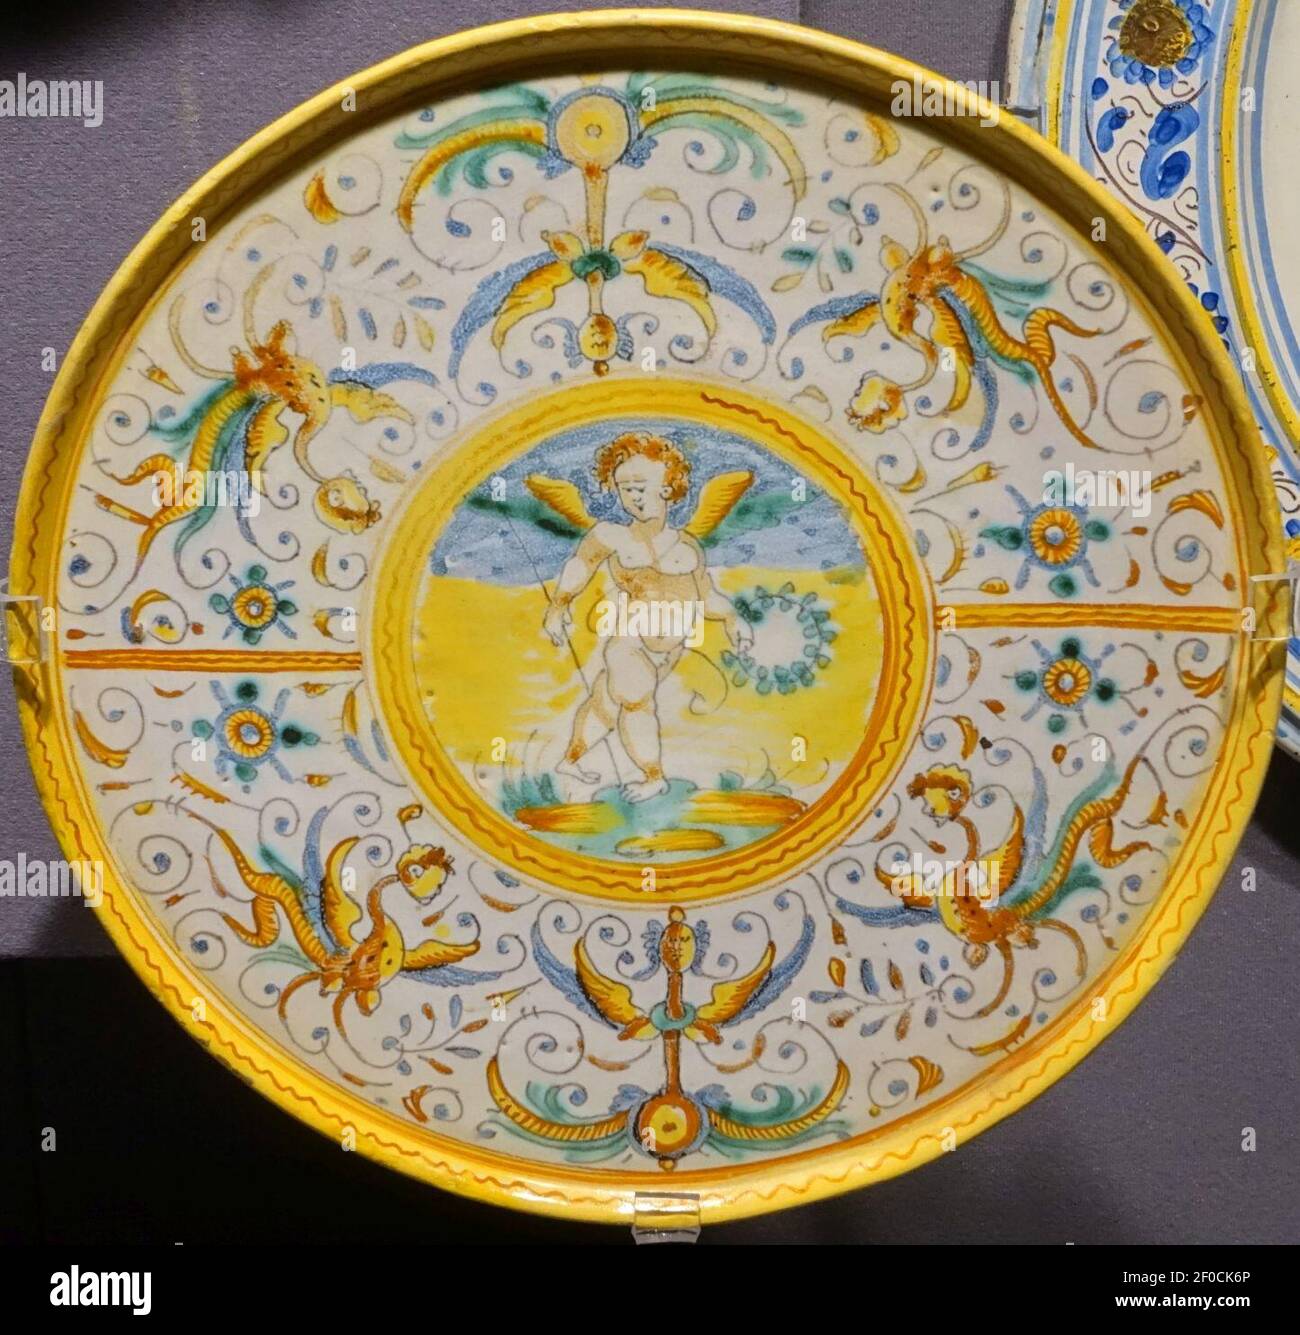 Plate, Italy, Deruta, early 1600s, maiolica Stock Photo